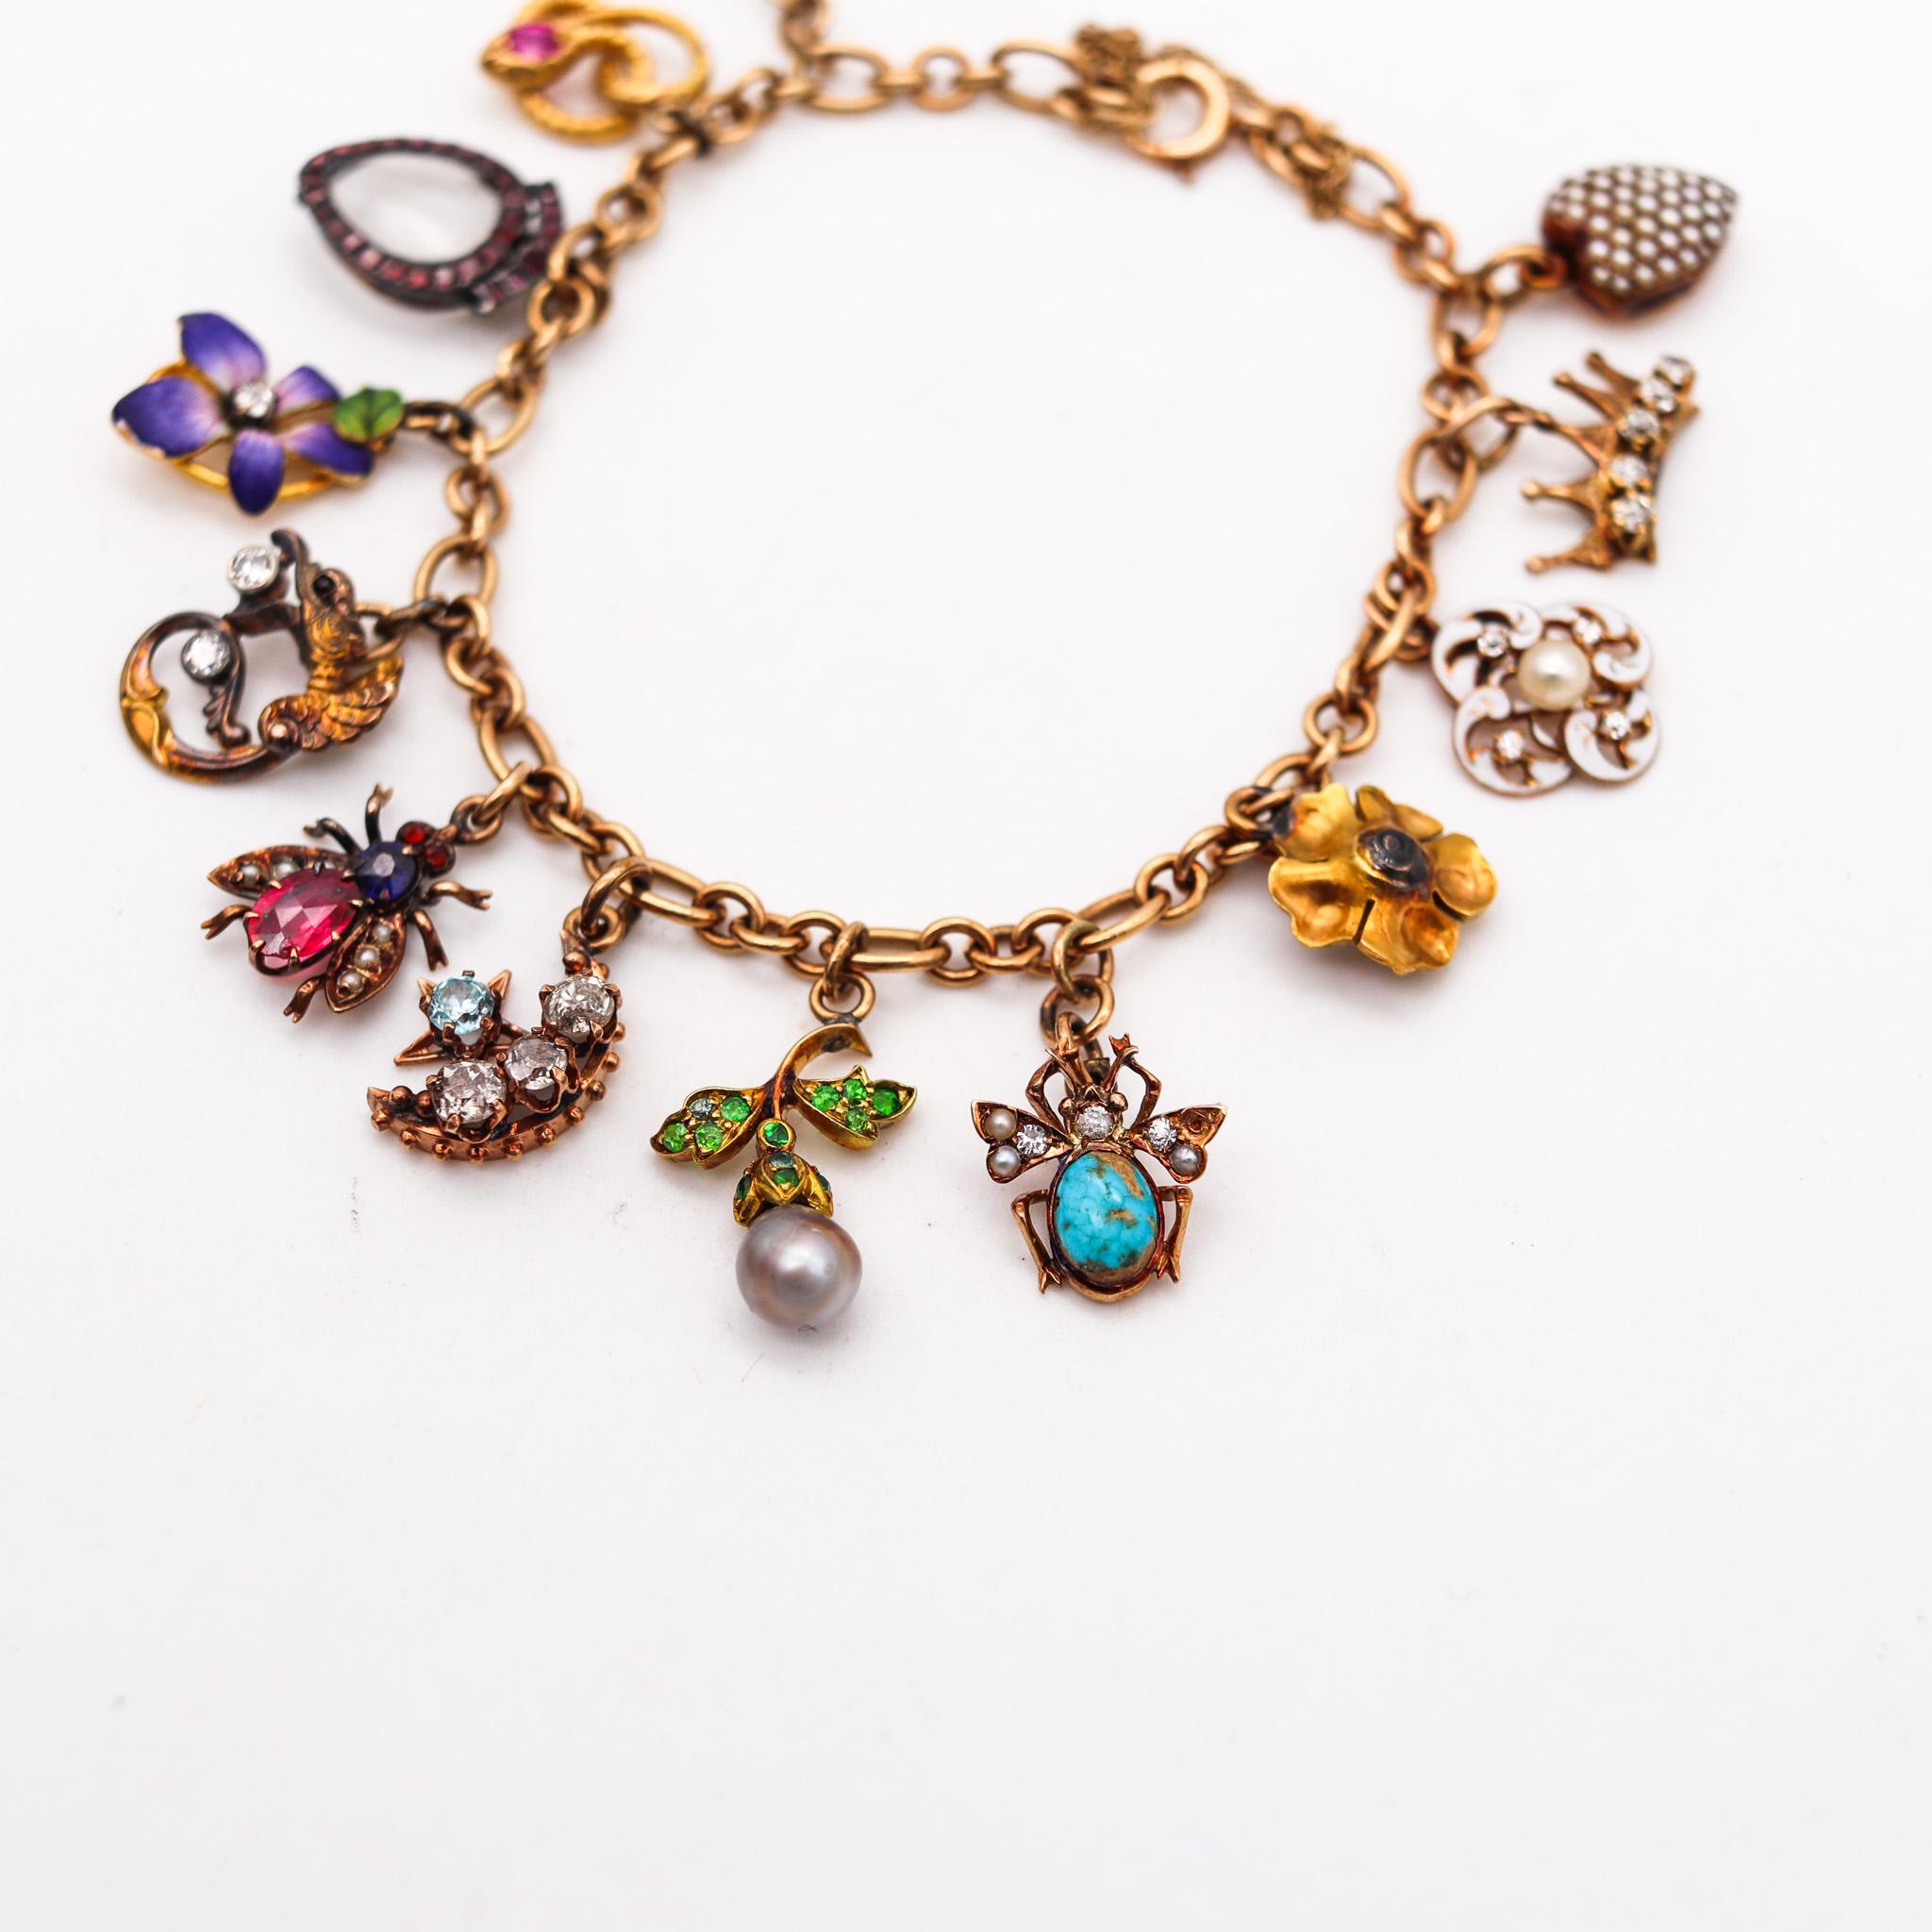 Art Nouveau 1910 Charms Bracelet In 14Kt Gold With Multi Gemstones And Enamels In Excellent Condition For Sale In Miami, FL